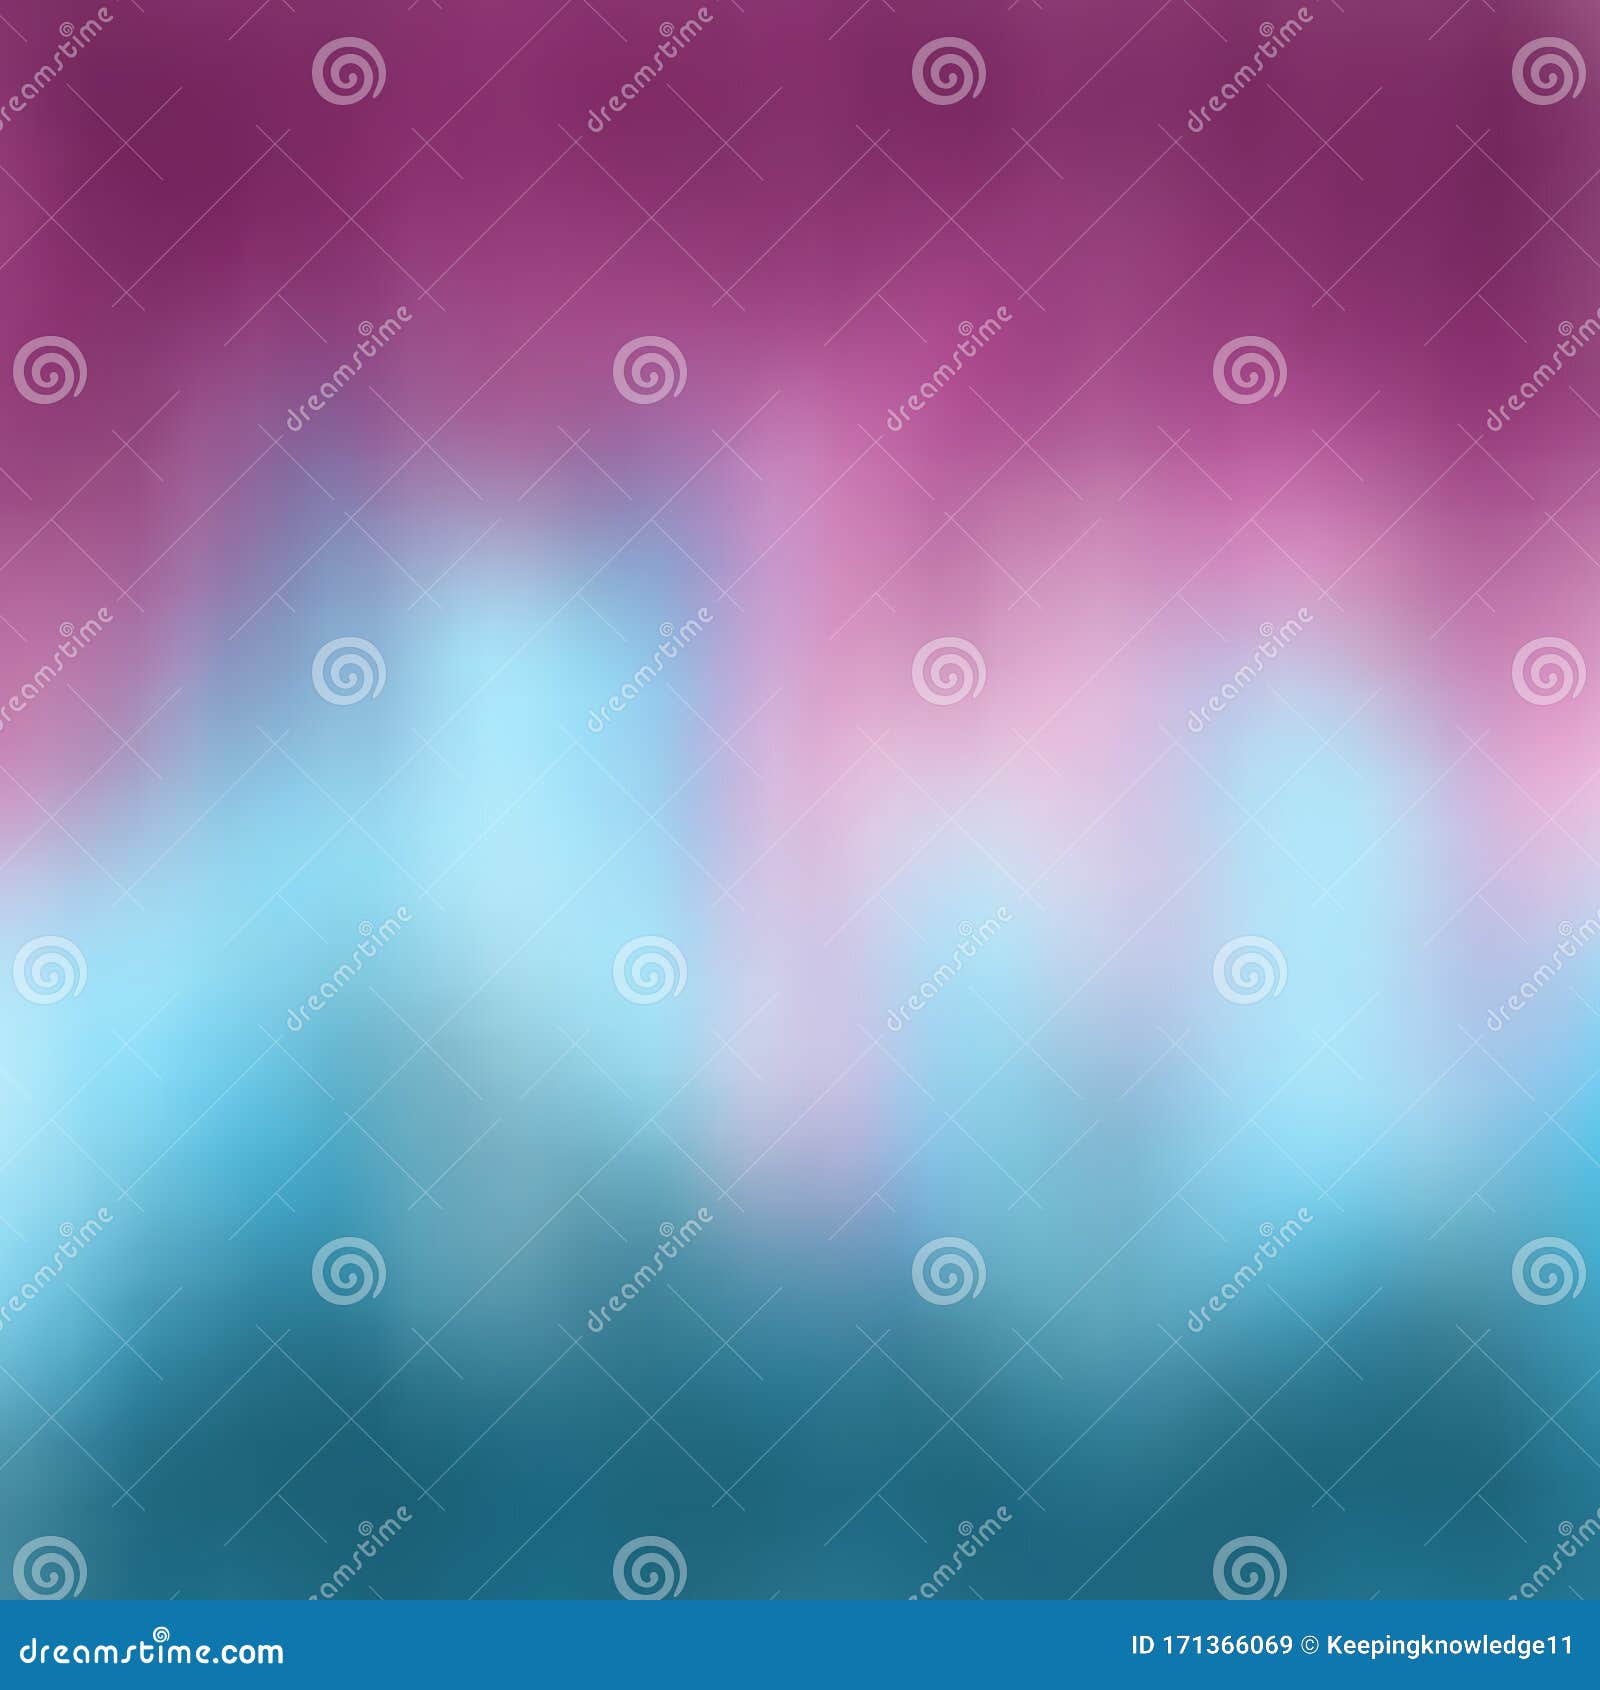 abstract blurred background. a beautiful wavy transition from the deep purplish-red color of byzantium to green-blue, gradient,